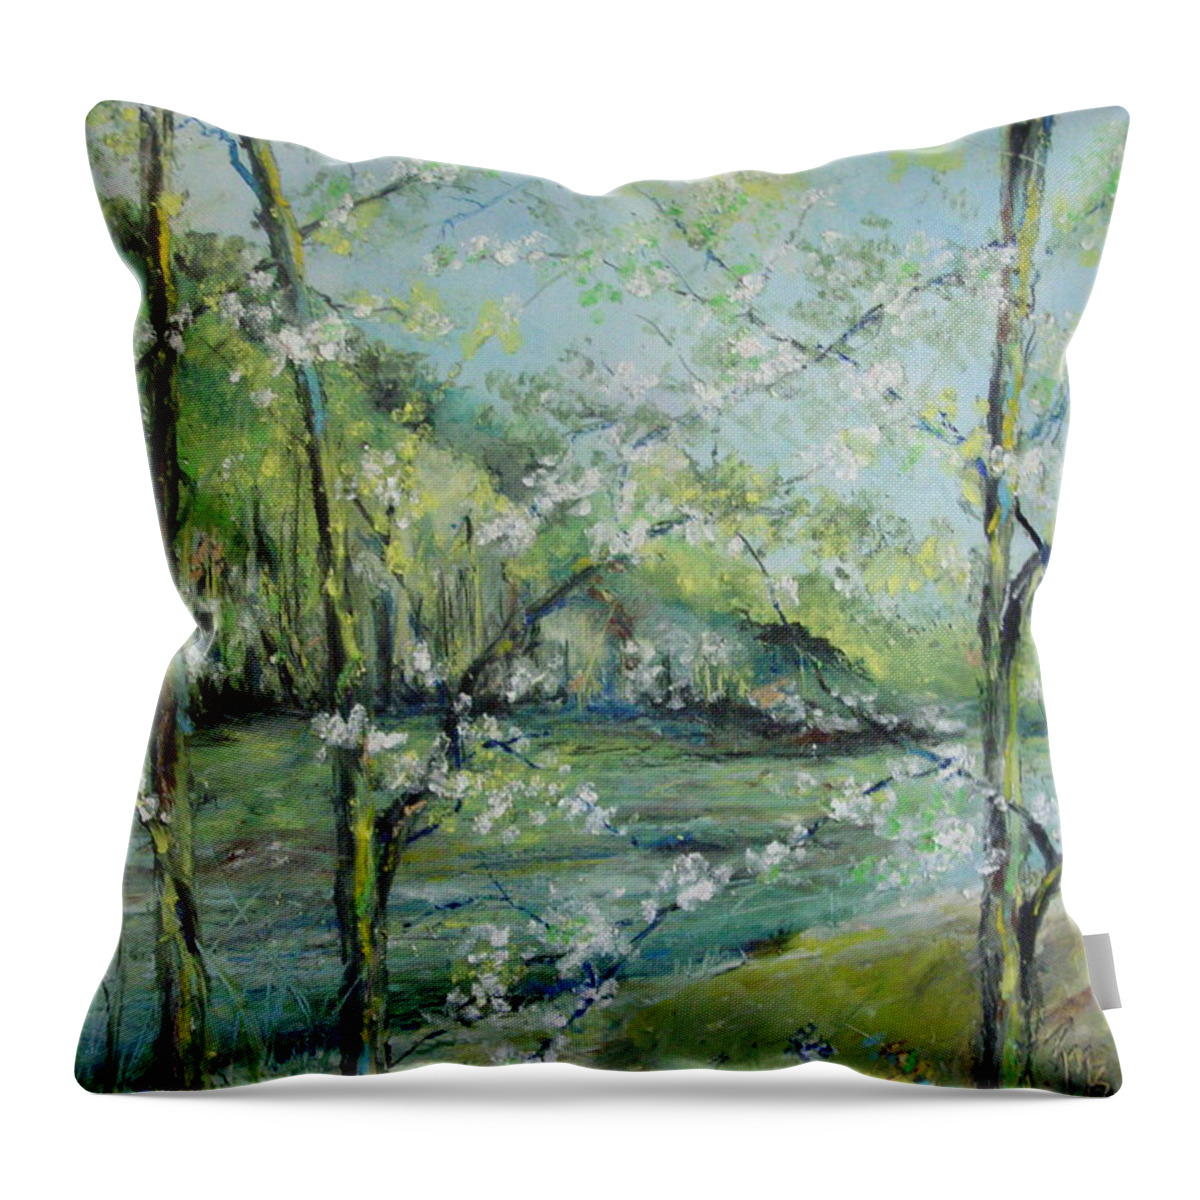 Water Throw Pillow featuring the painting Ouachita River in Spring by Robin Miller-Bookhout